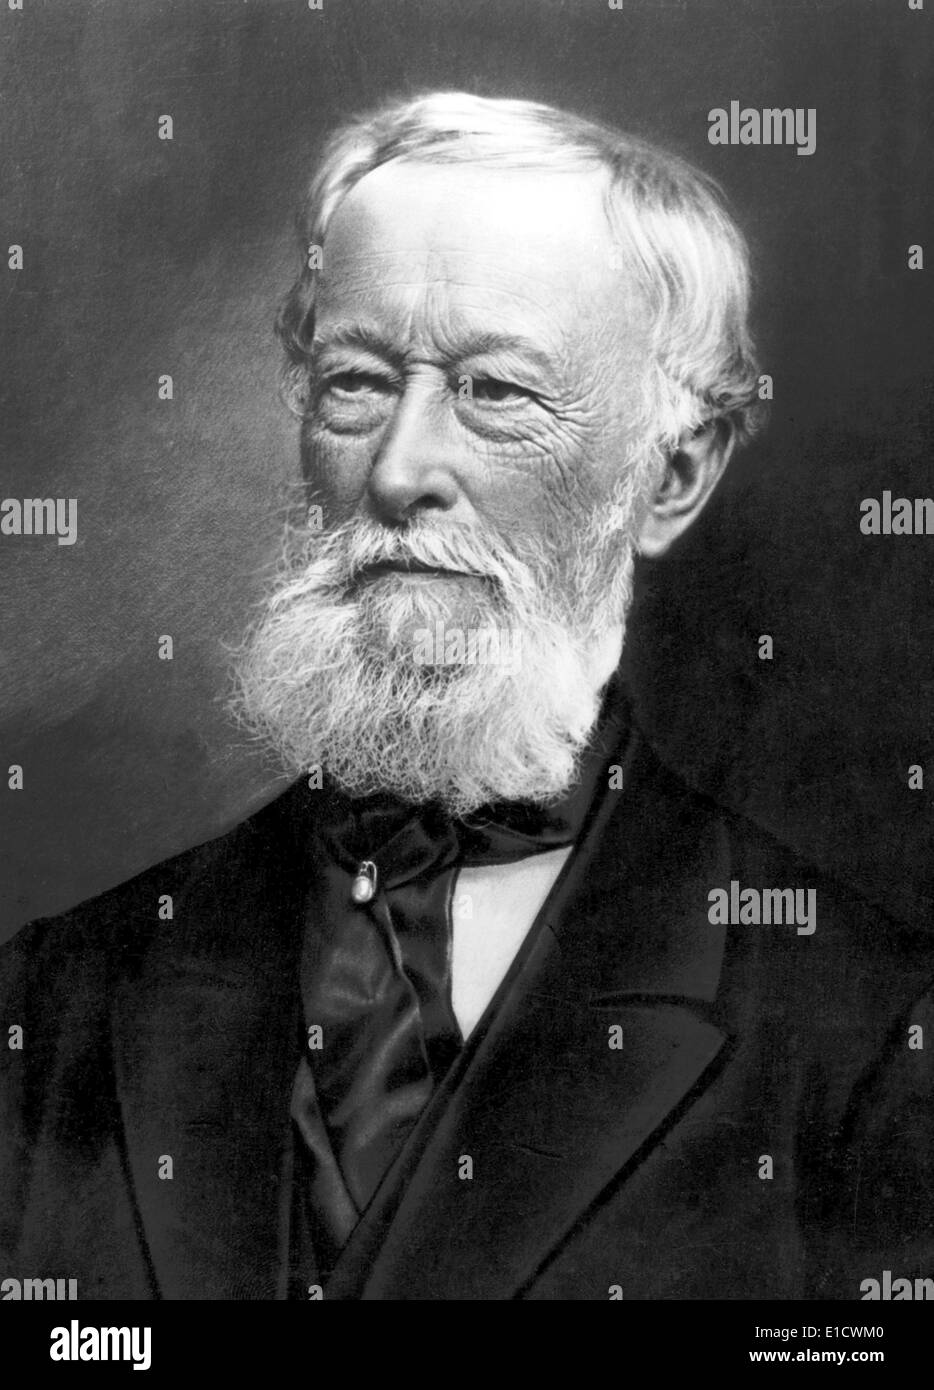 Alfred Krupp (born Alfried Felix Alwyn Krupp), son of Friedrich Carl, born  1812 died 1887. Member of the Krupp family, which has been prominent in German industry since the early 19th century. Stock Photo